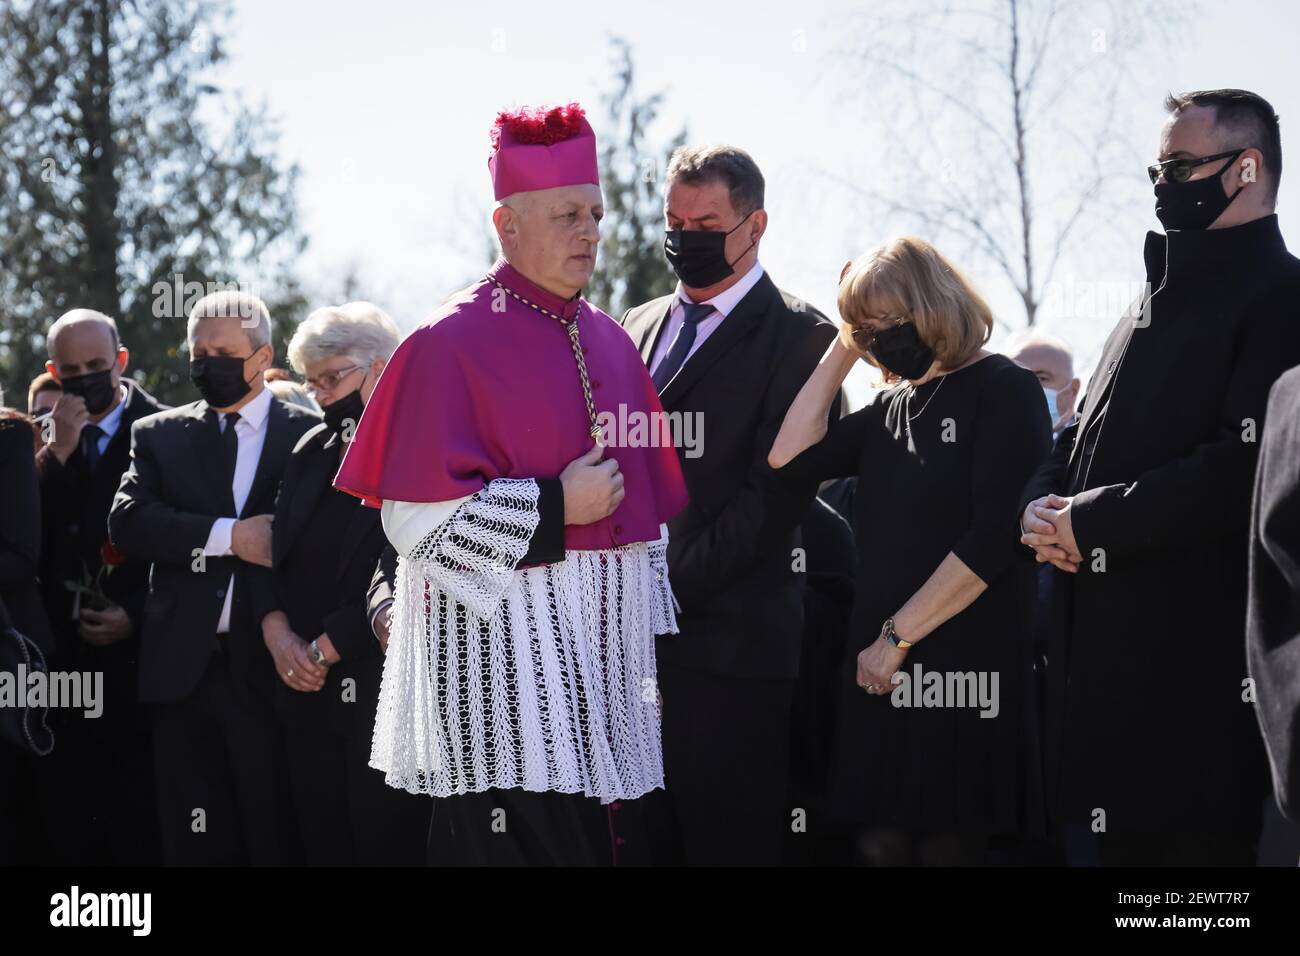 Funeral of Zagreb Mayor Milan Bandic, who died on February 28, 2021 from a heart attack at Zagreb's Mirogoj cemetery. A large number of citizens and p Stock Photo